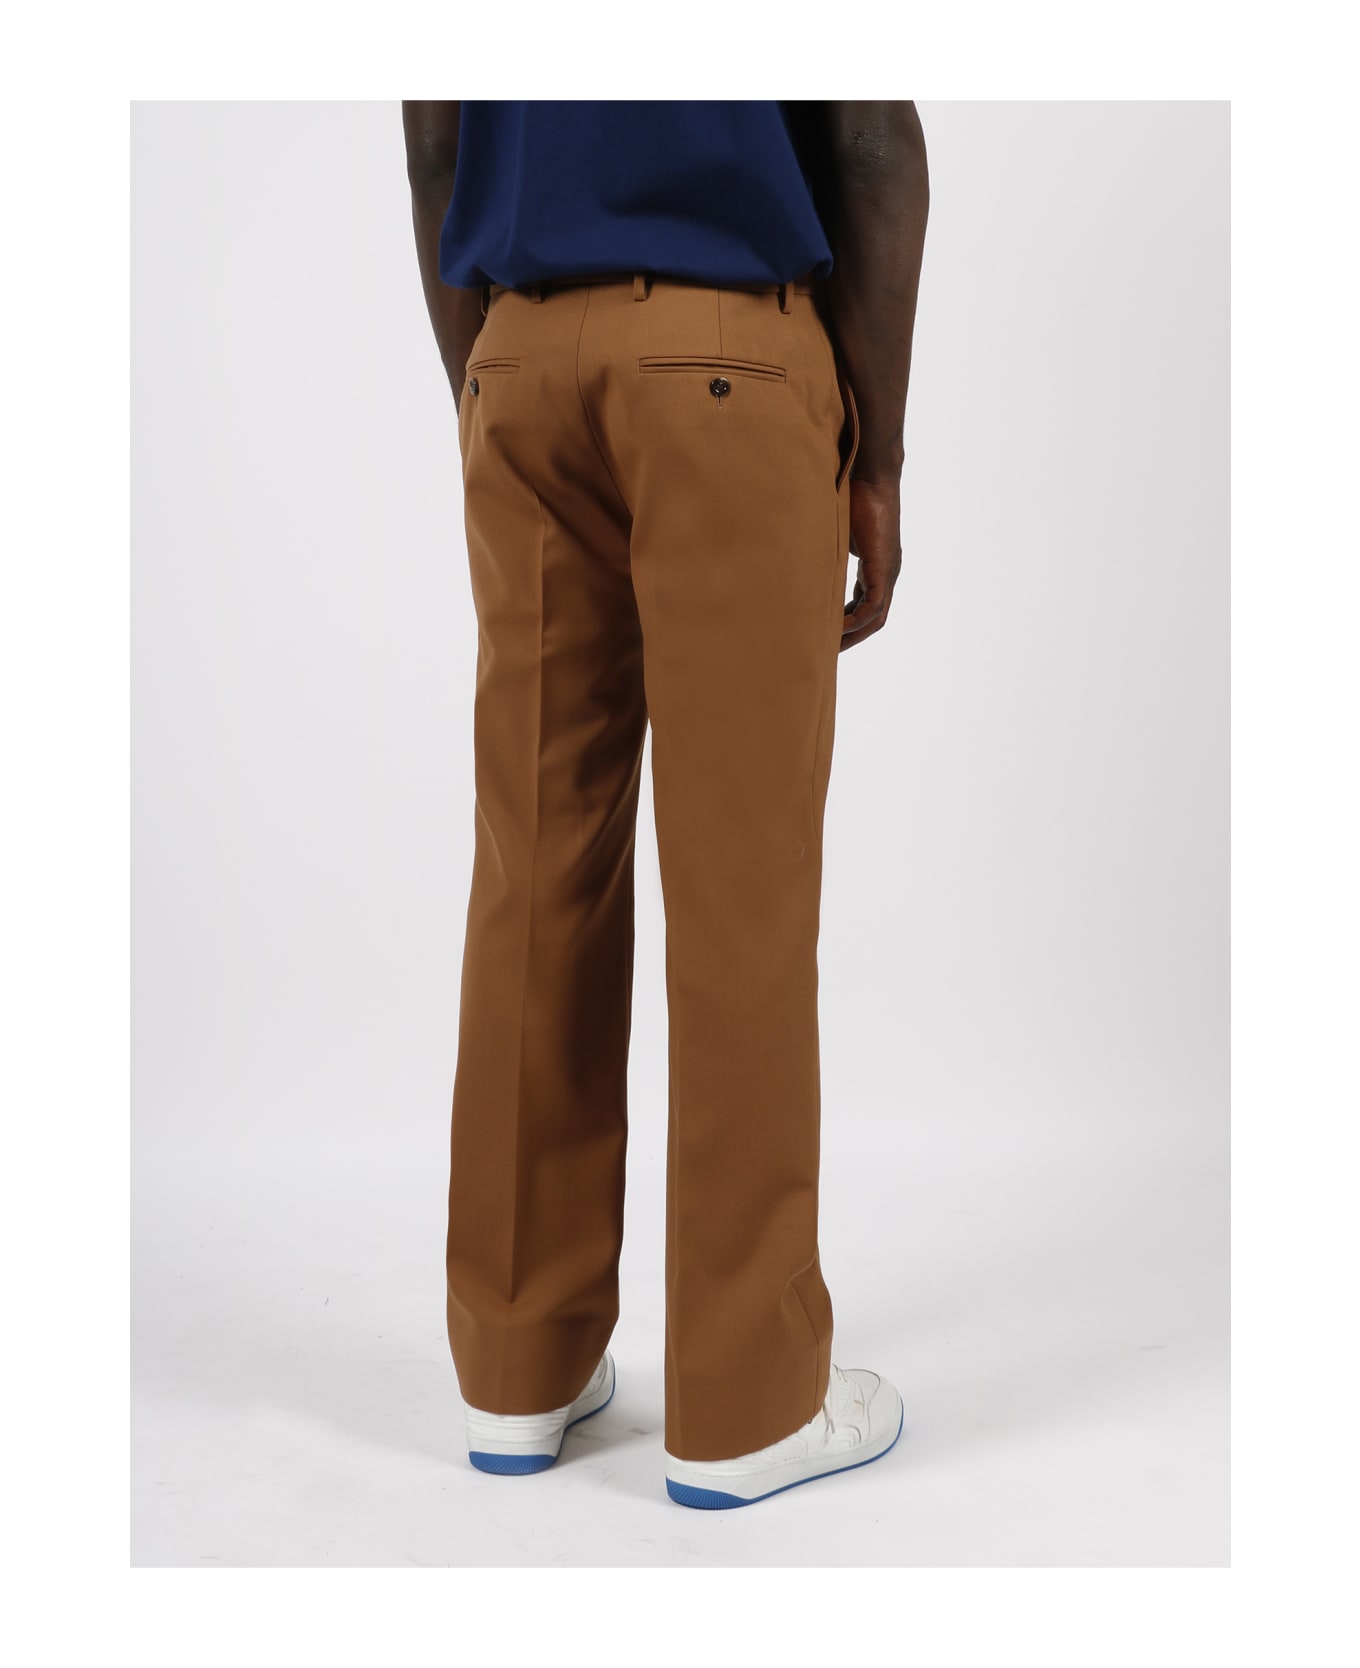 Gucci 70s Style Trousers | italist